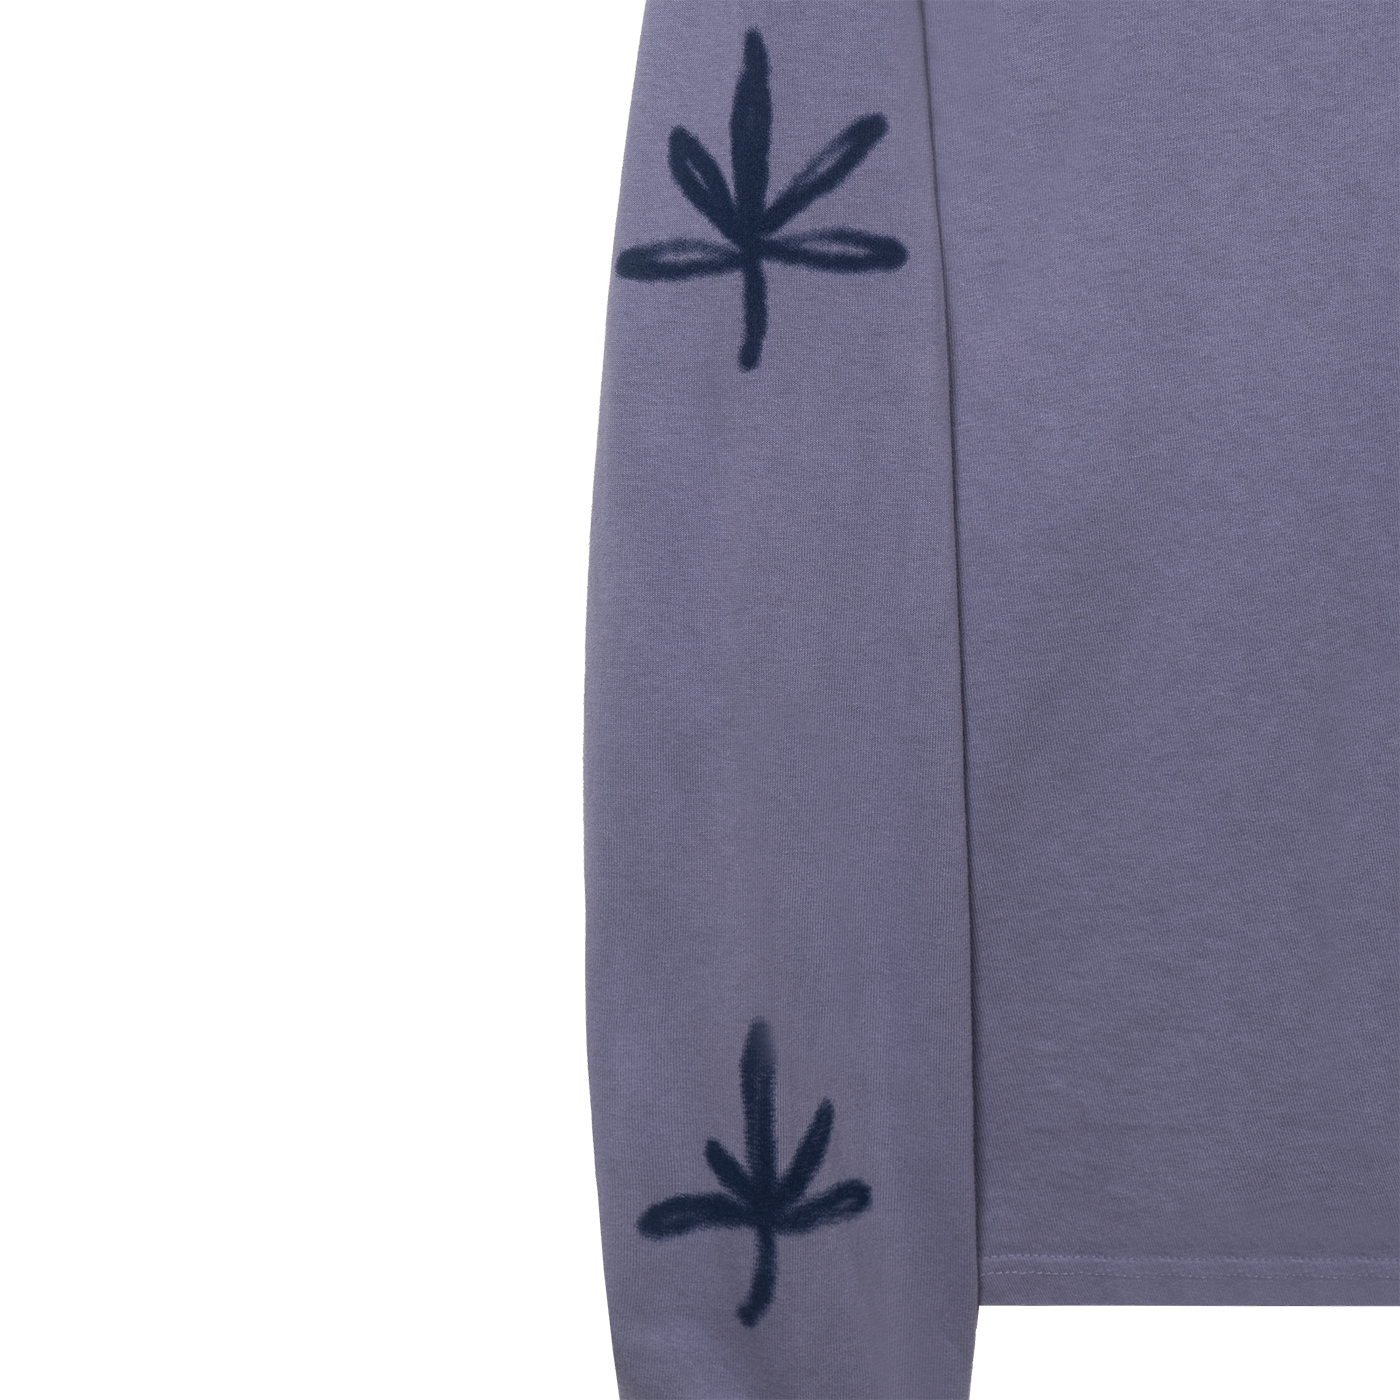 Free The Weed L/s Tee